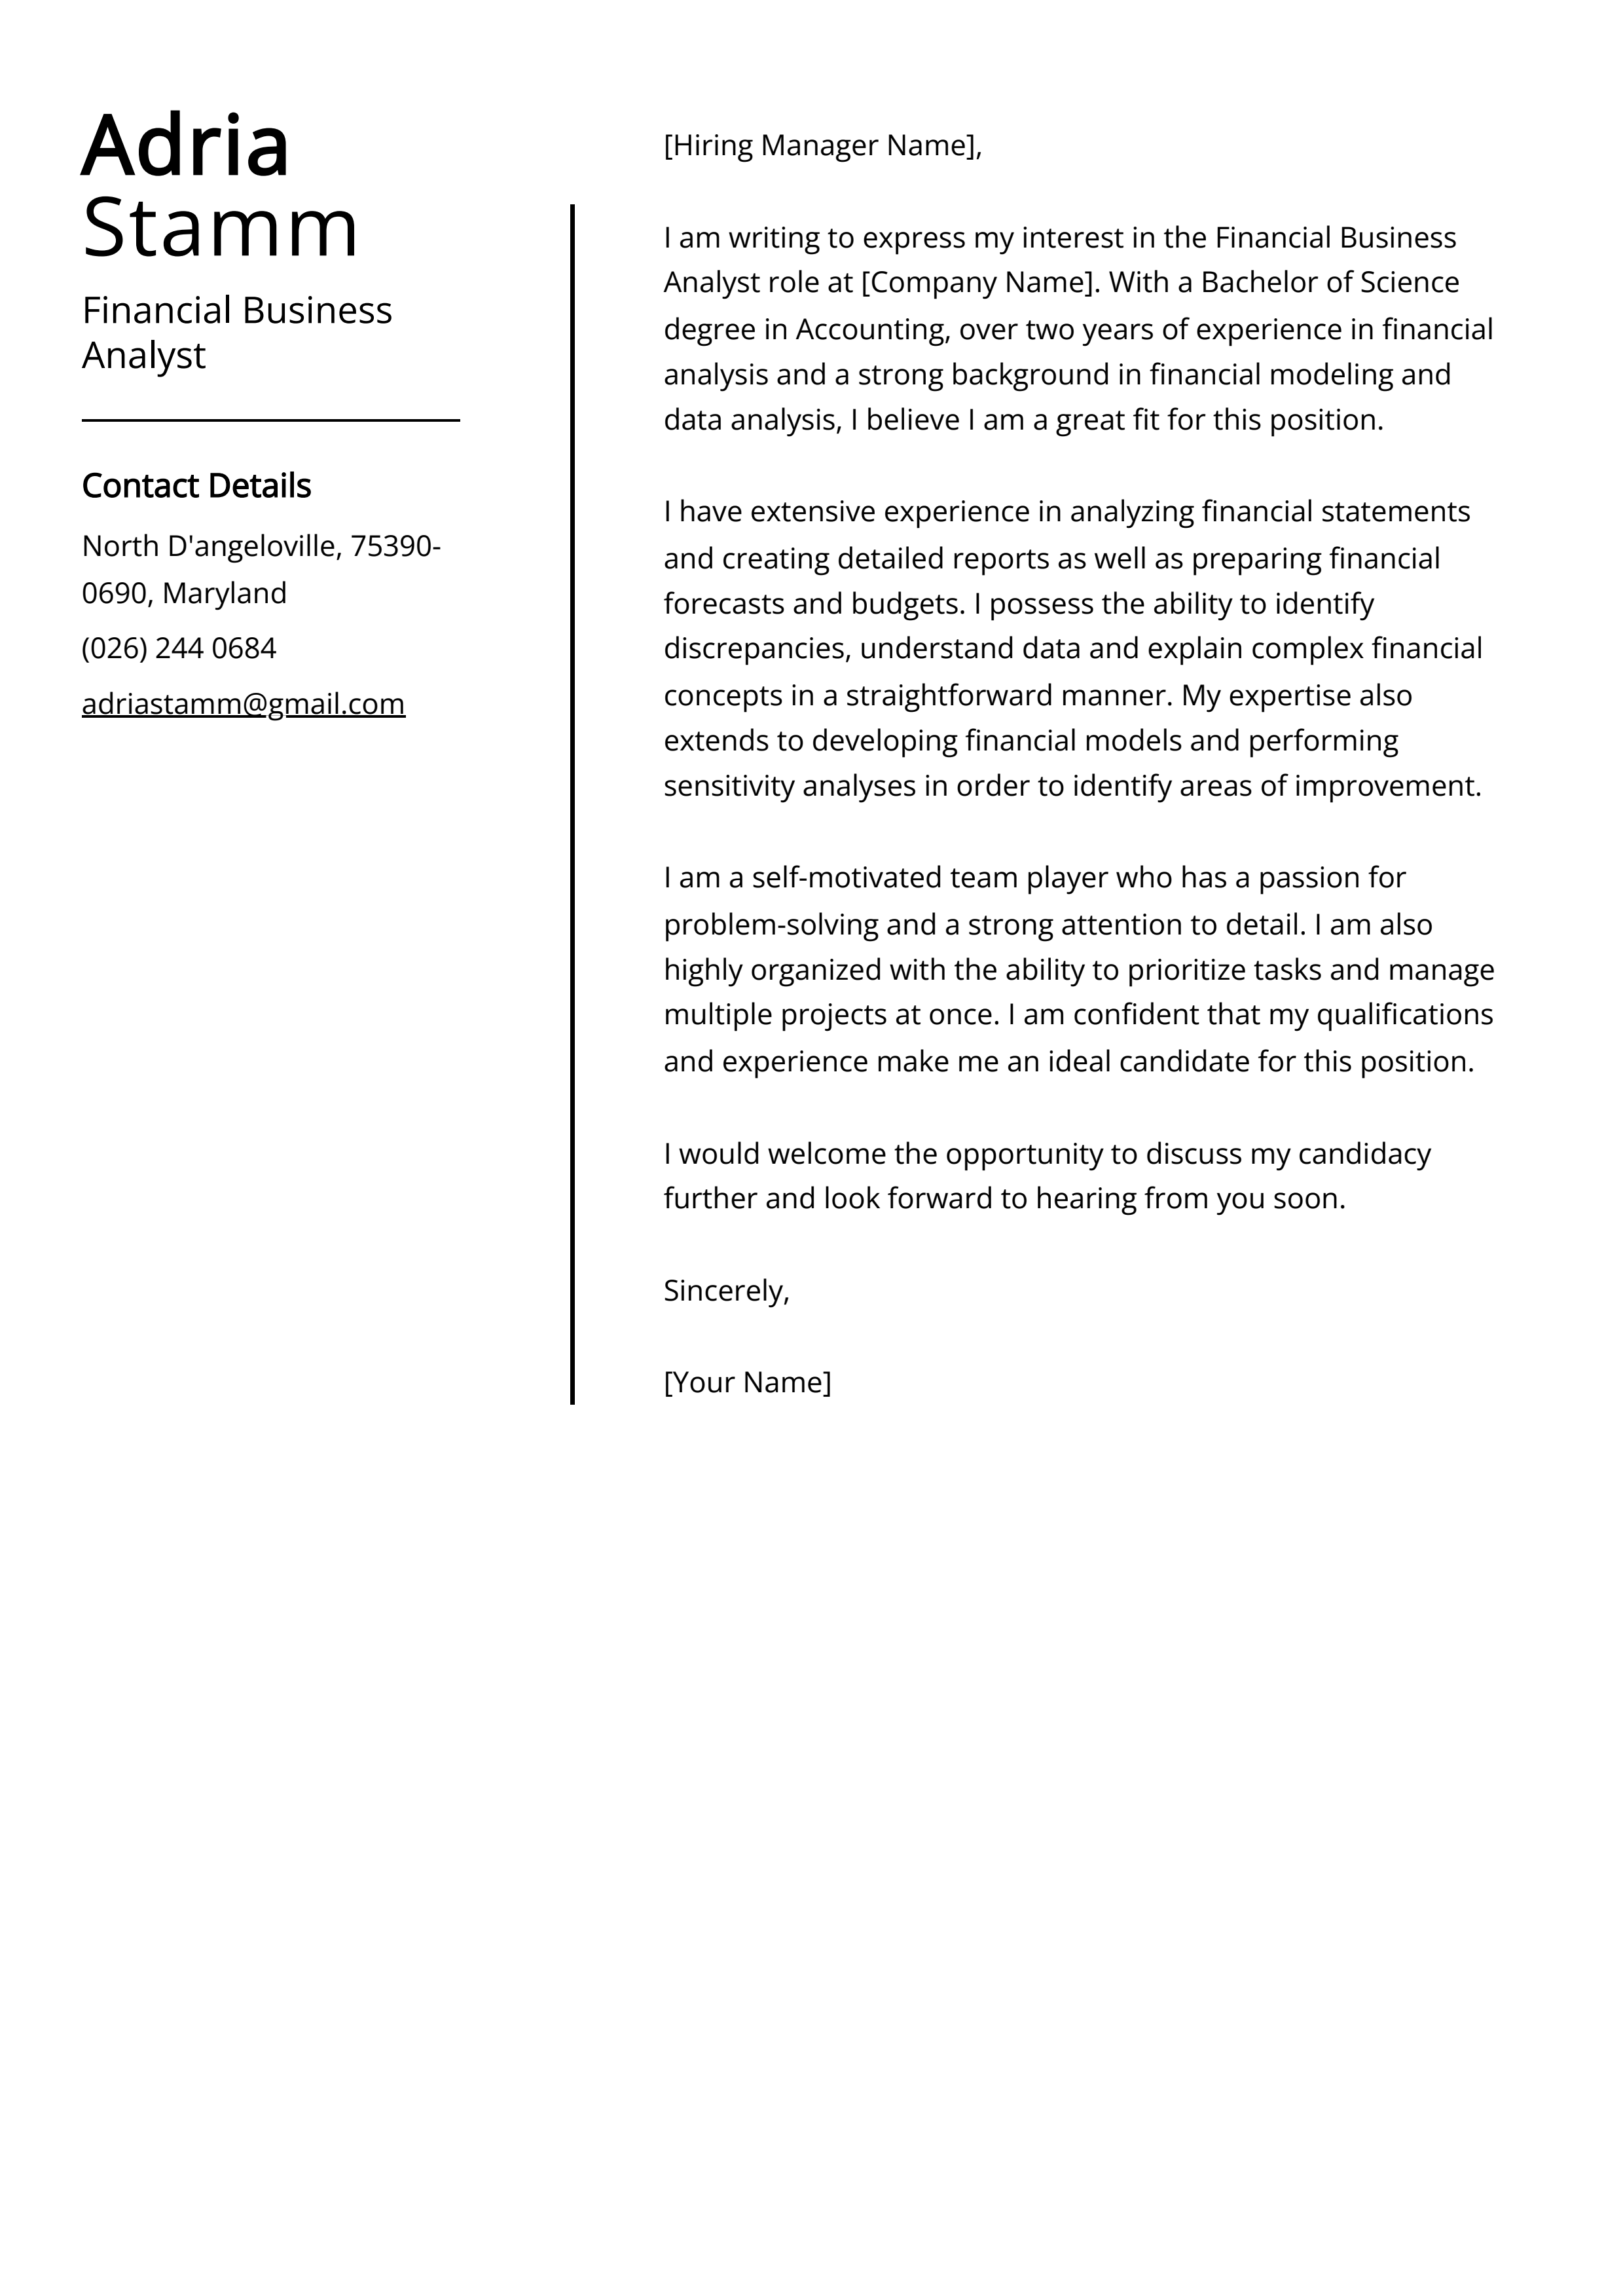 Financial Business Analyst Cover Letter Example